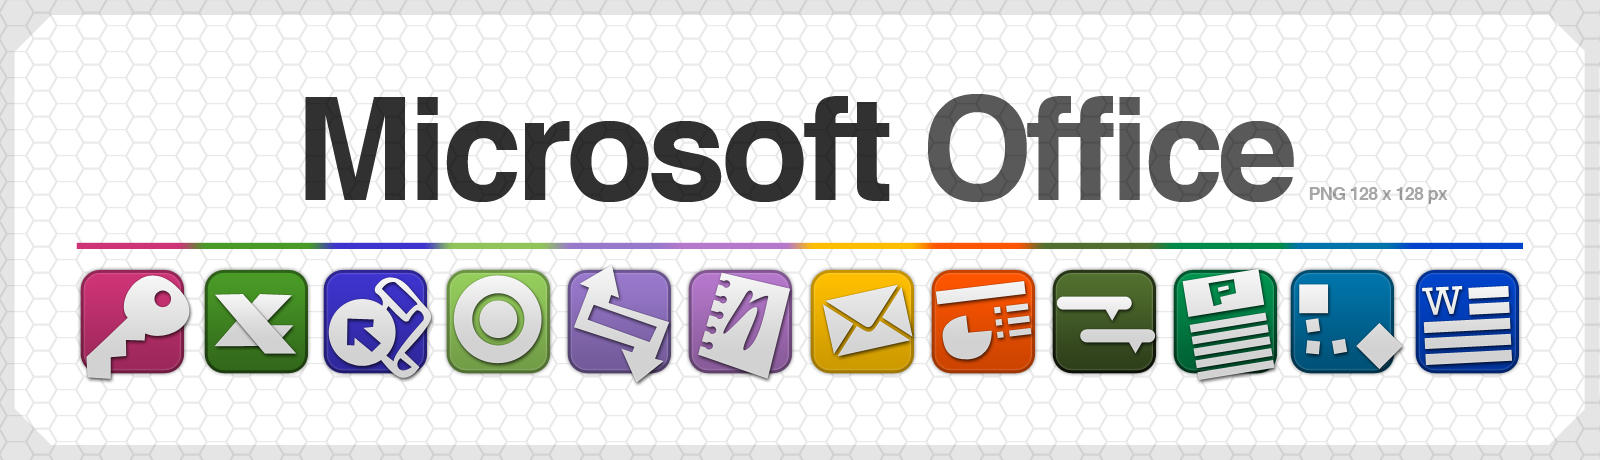 Ms Office Icons 128x128px Png By Gorganzola1 On Deviantart